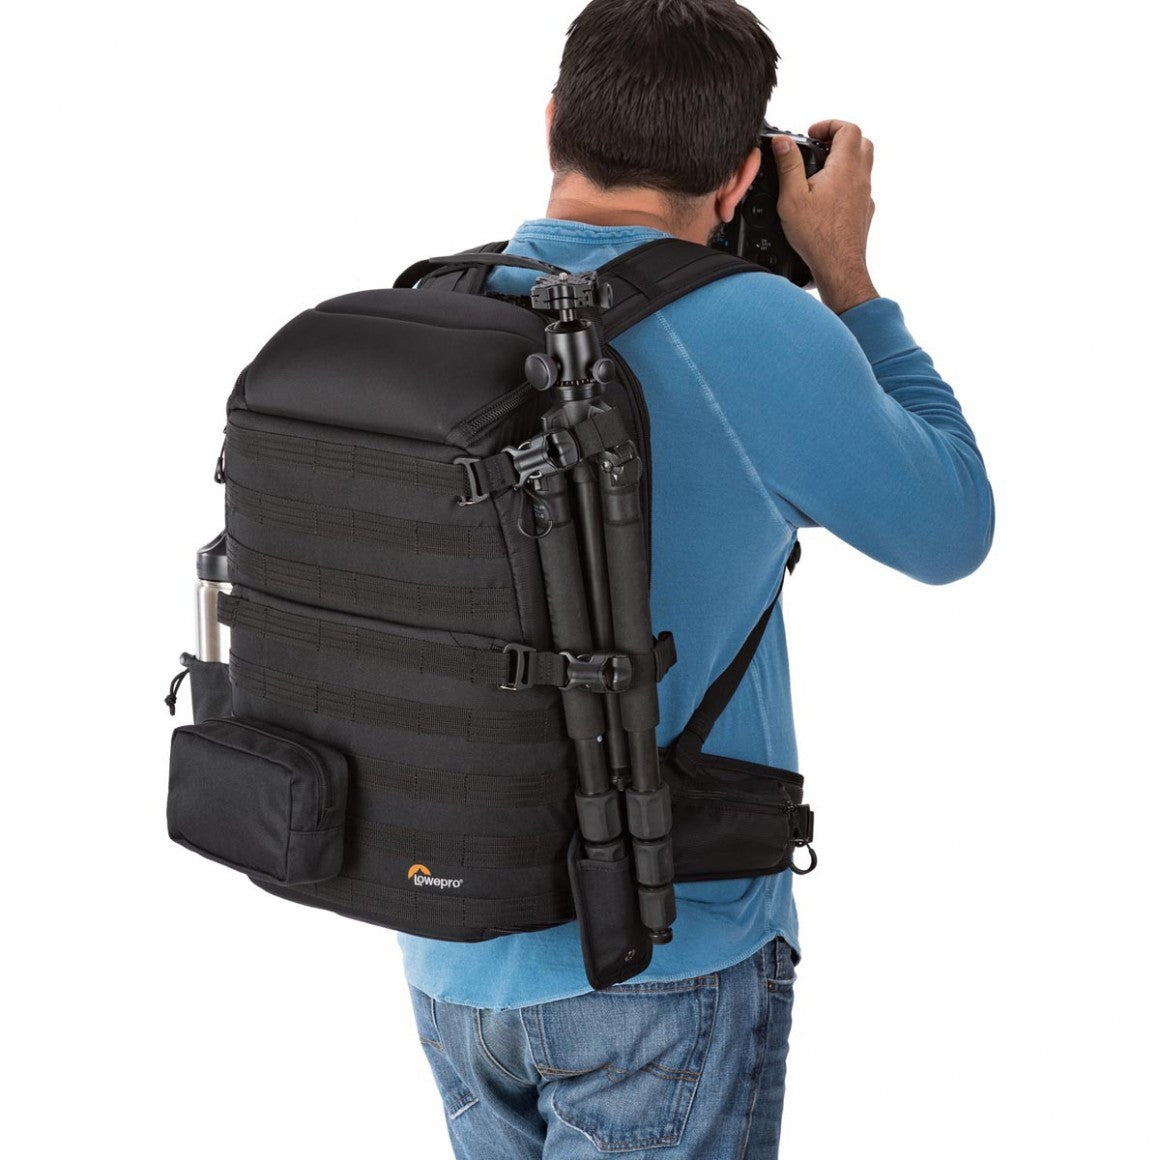 Lowepro Pro Tactic 450 AW Camera Bag, bags backpacks, Lowepro - Pictureline  - 5